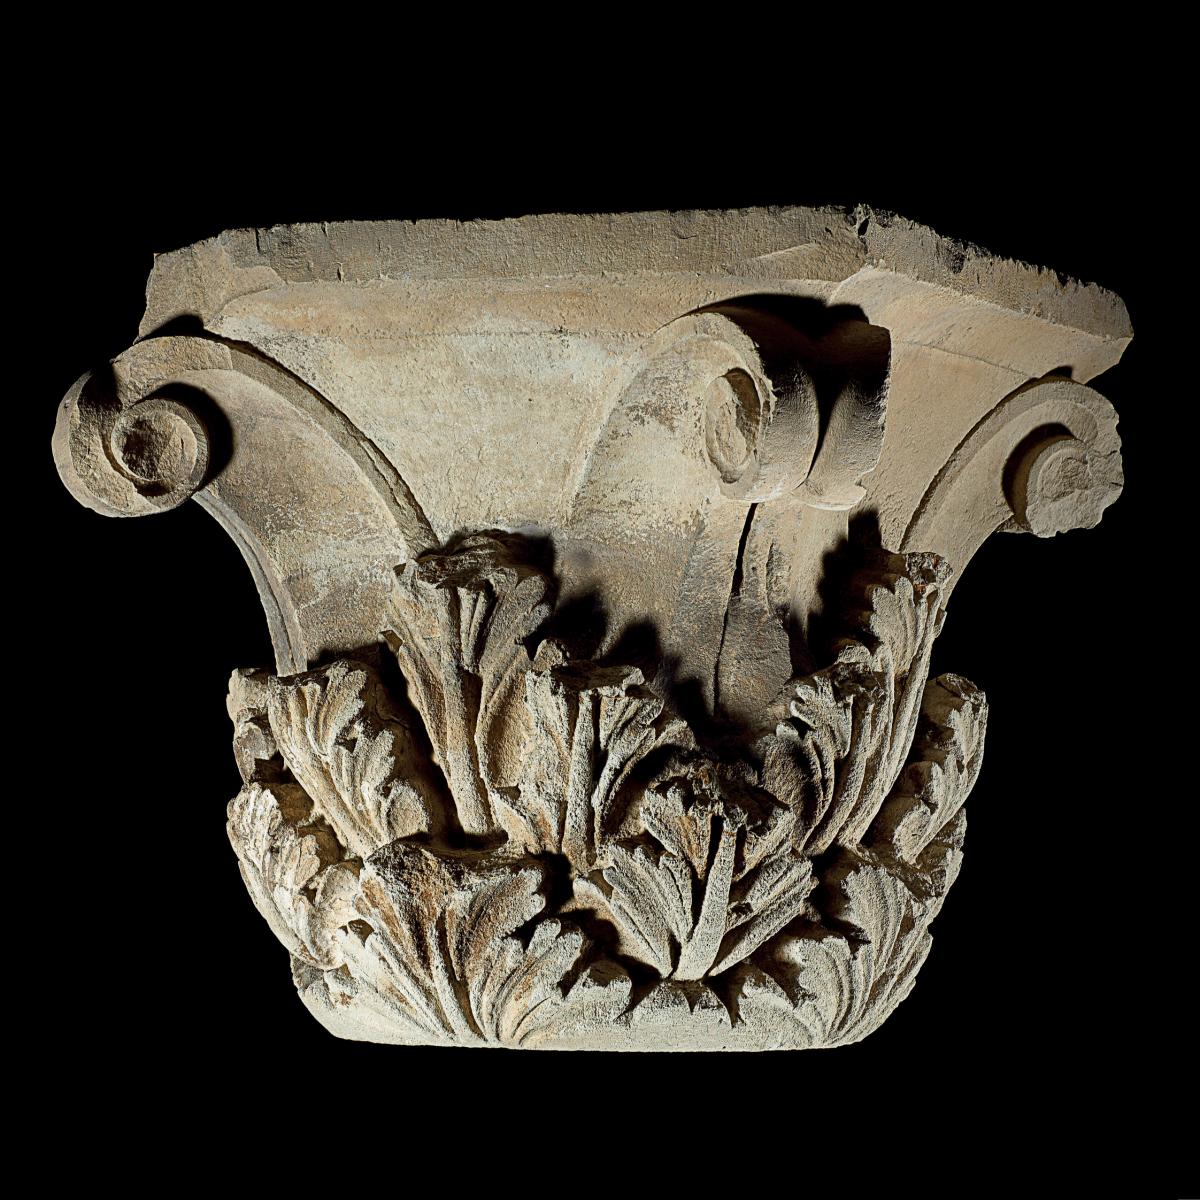 Photograph of a corinthian capital, leaves carved from stone